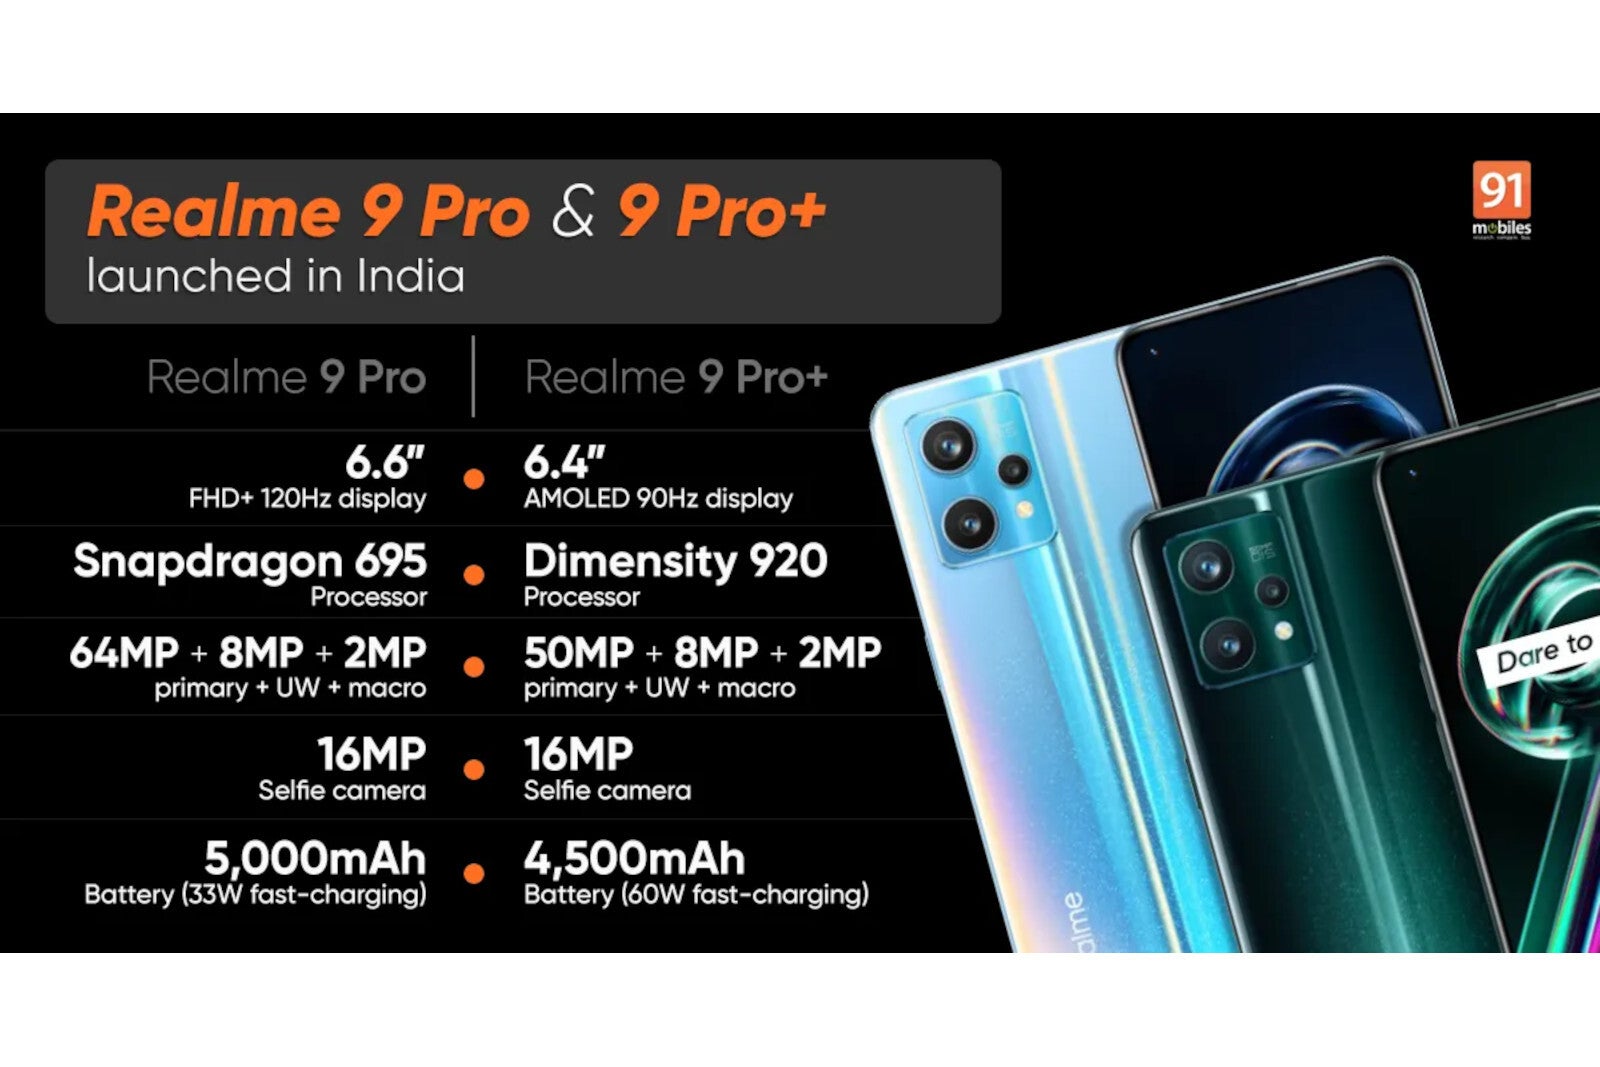 realme 9i: Specifications & Features - realme Community